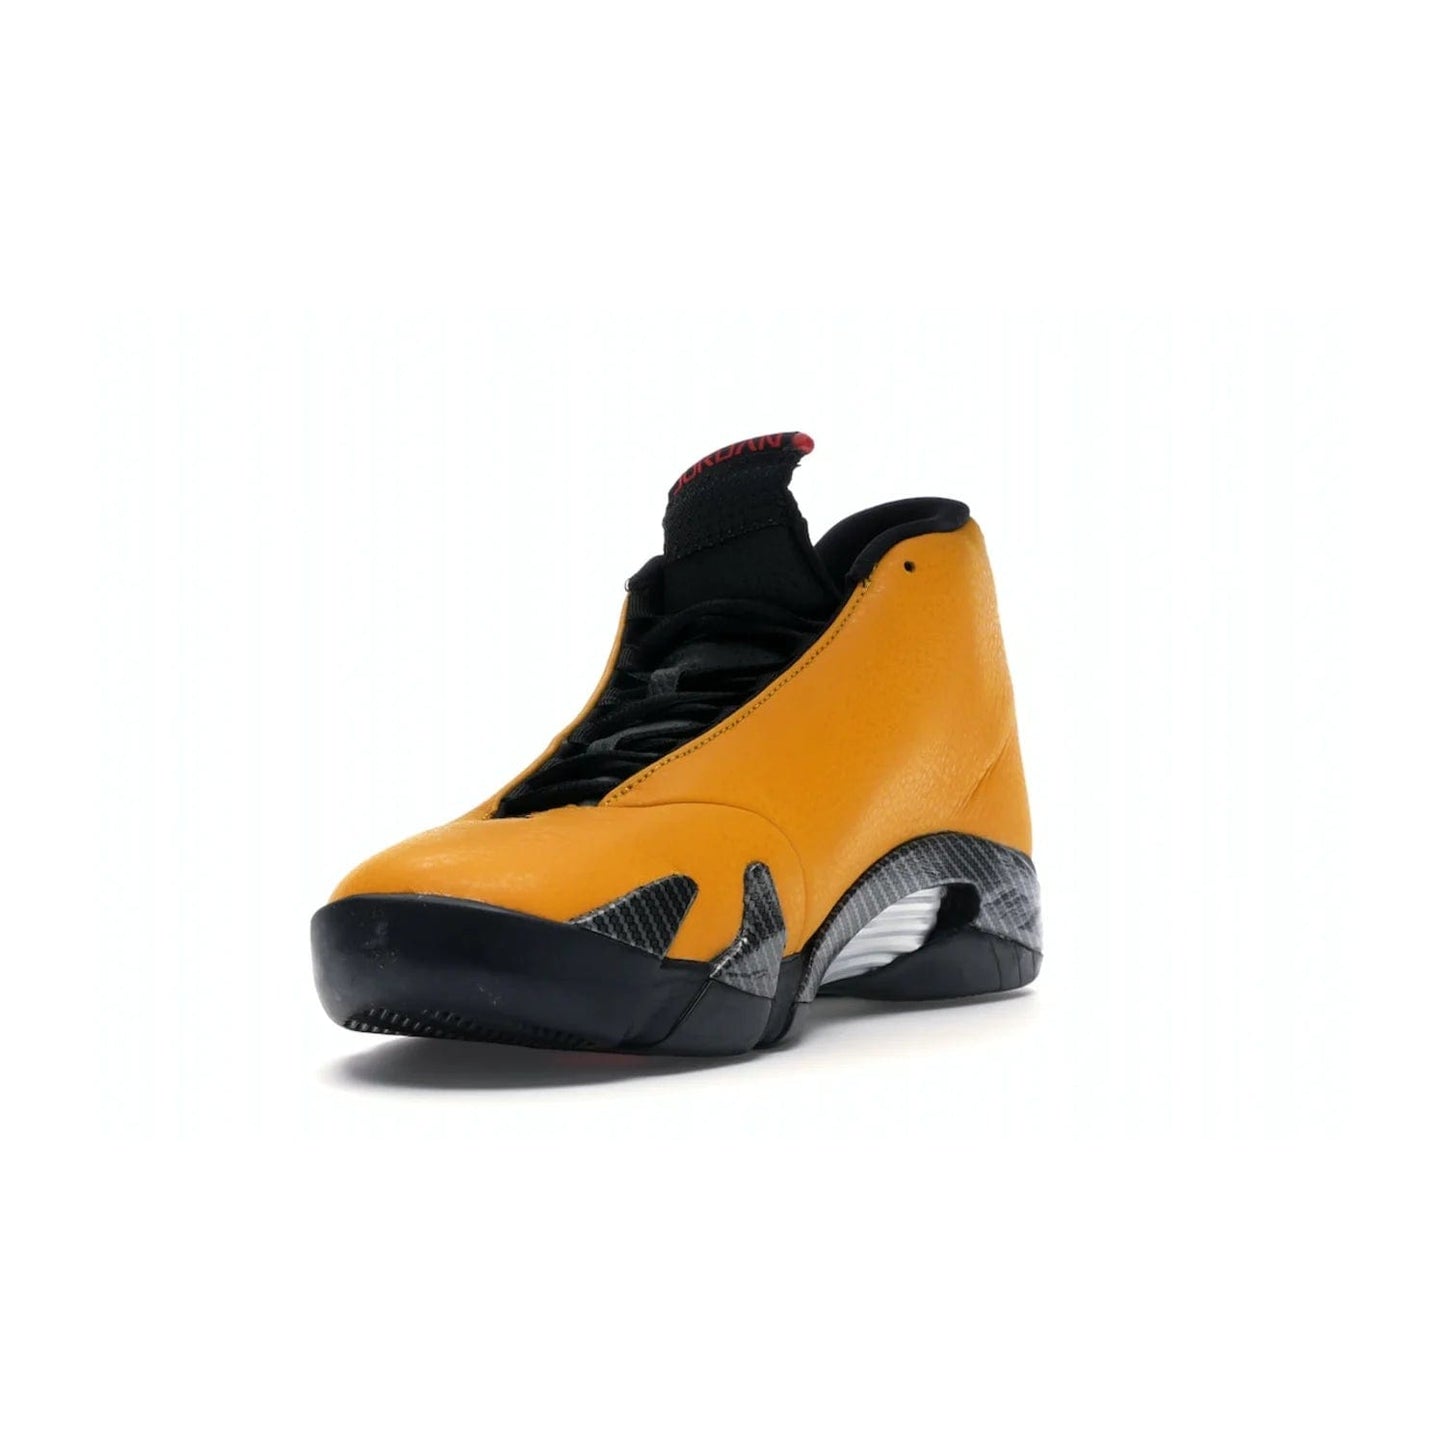 Jordan 14 Retro University Gold - Image 13 - Only at www.BallersClubKickz.com - Air Jordan 14 Retro University Gold: High-quality leather sneaker with Jumpman, tongue & heel logos. Zoom Air units & herringbone traction for superior comfort. University Gold outsole for stylish streetwear.